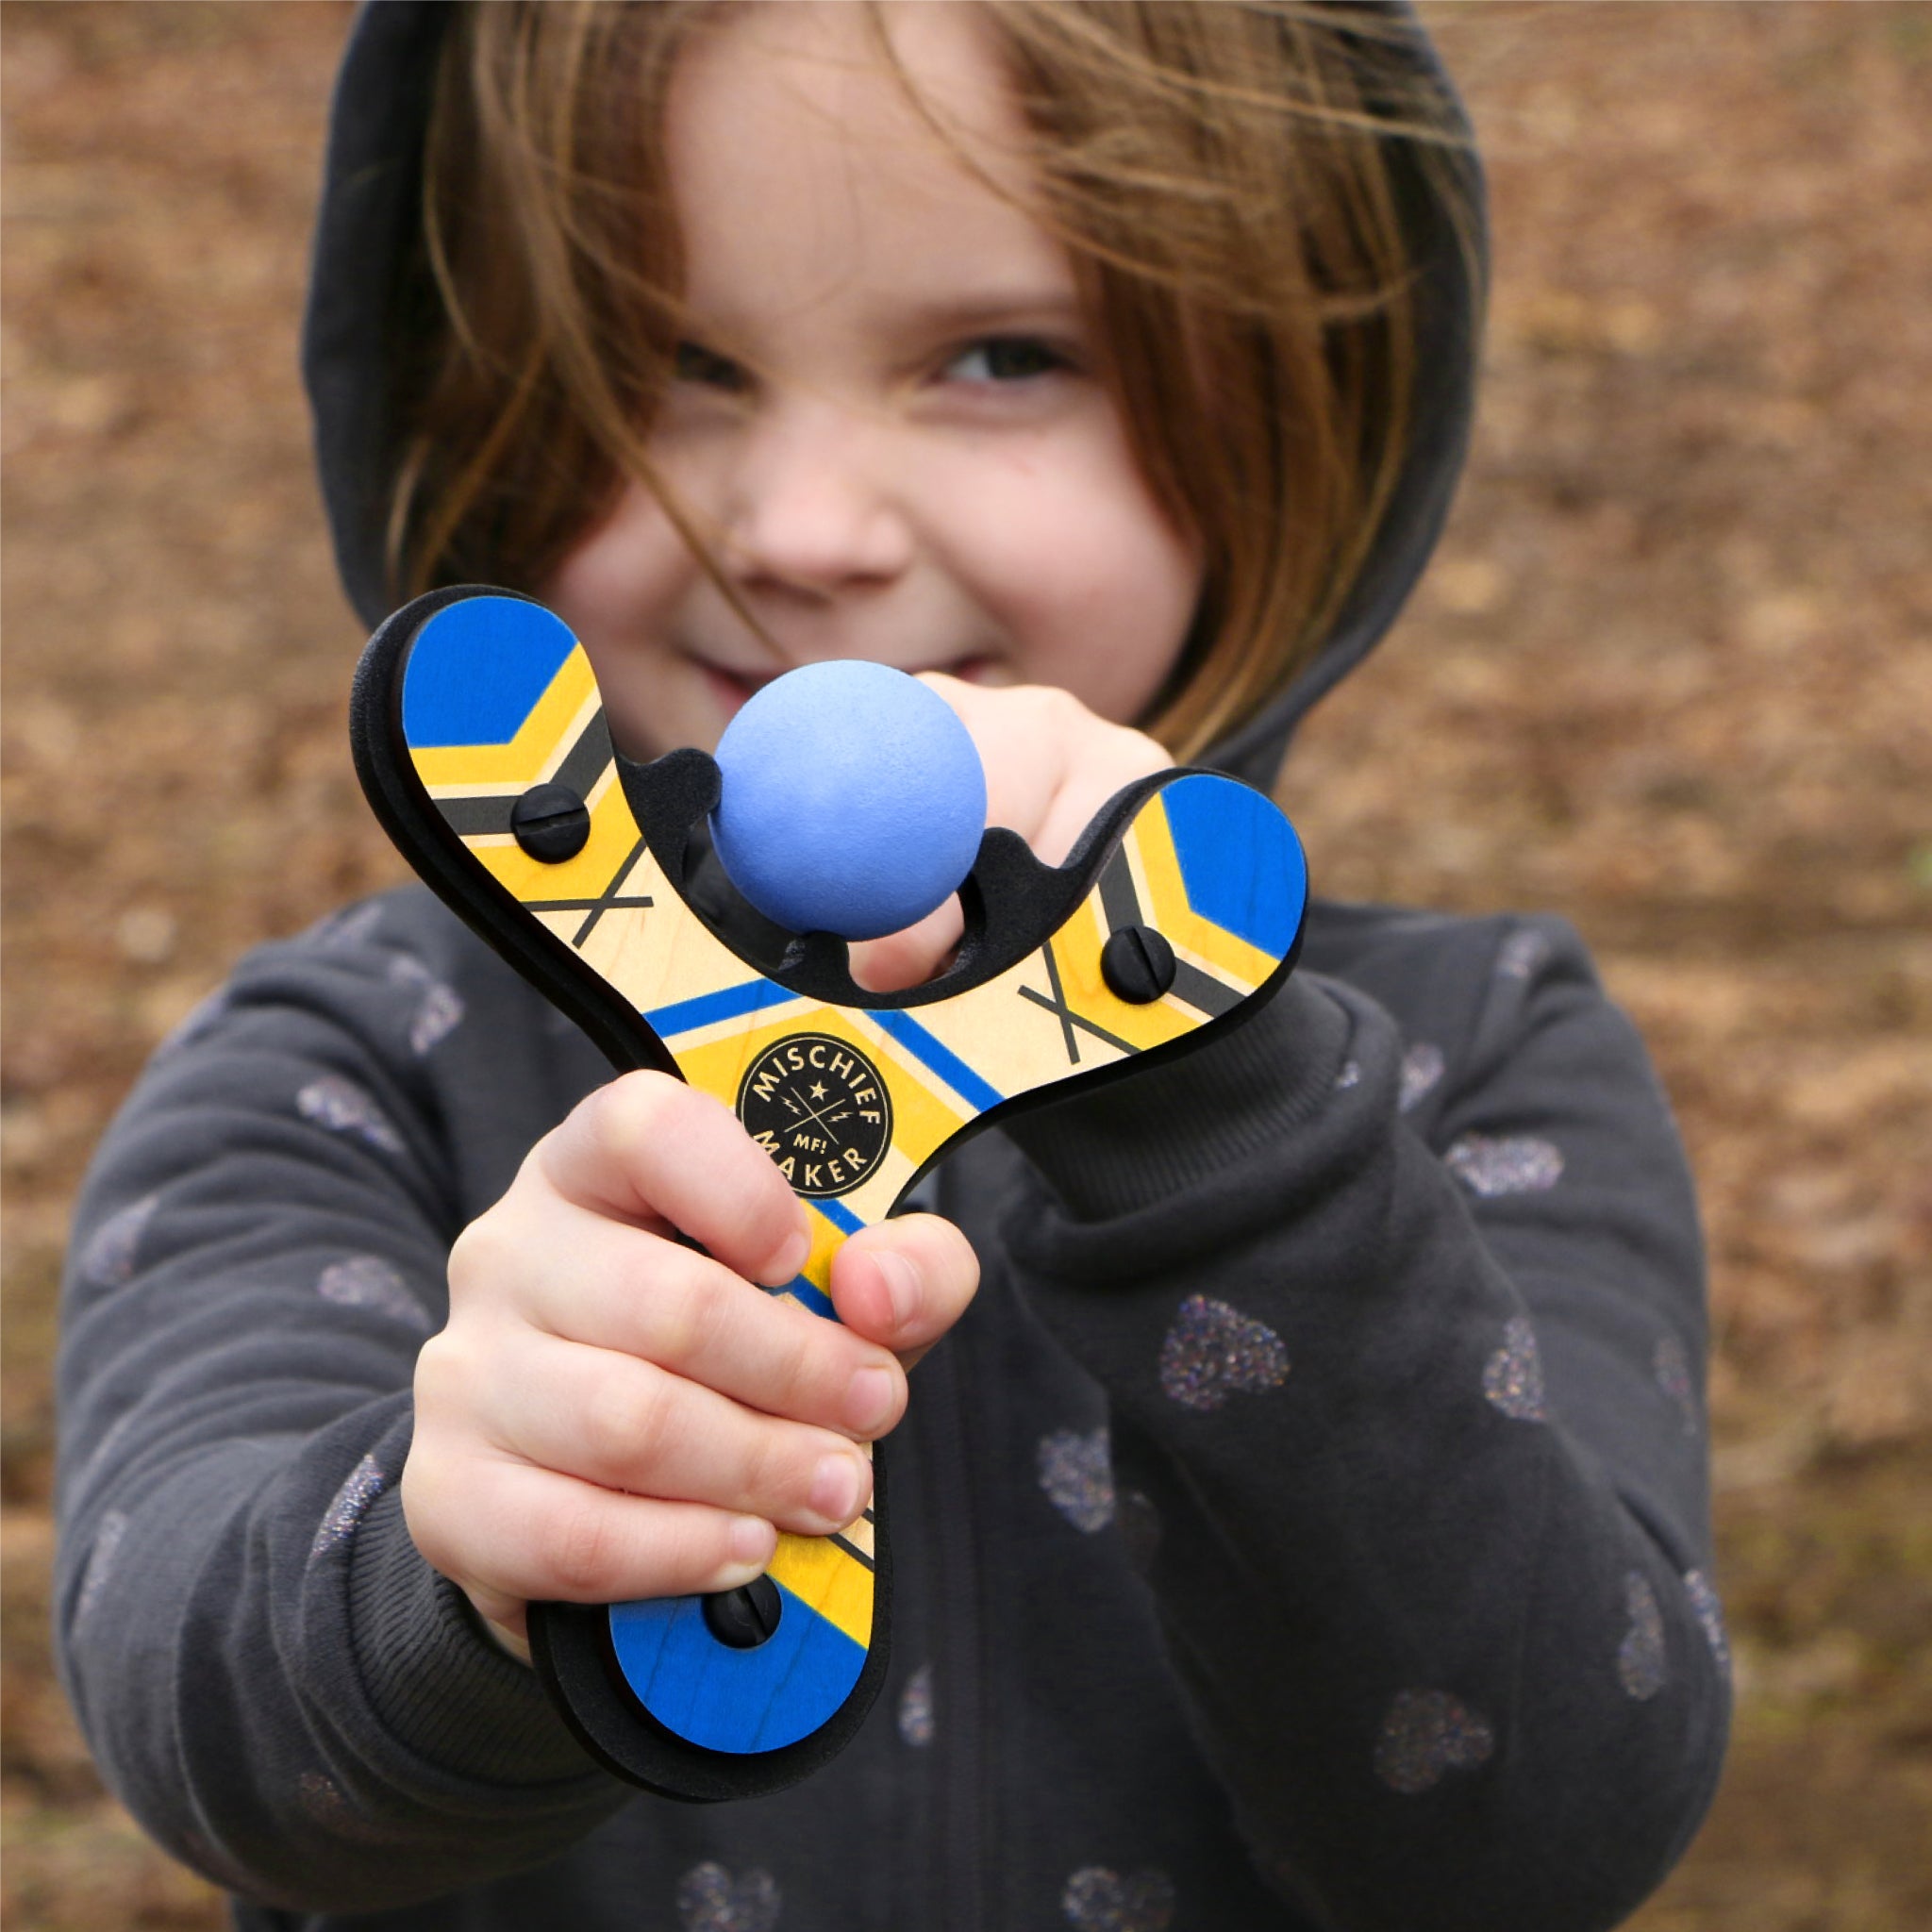 Blue Classic toy slingshot being shot by 6 year old girl. Mischief Maker by Mighty Fun!